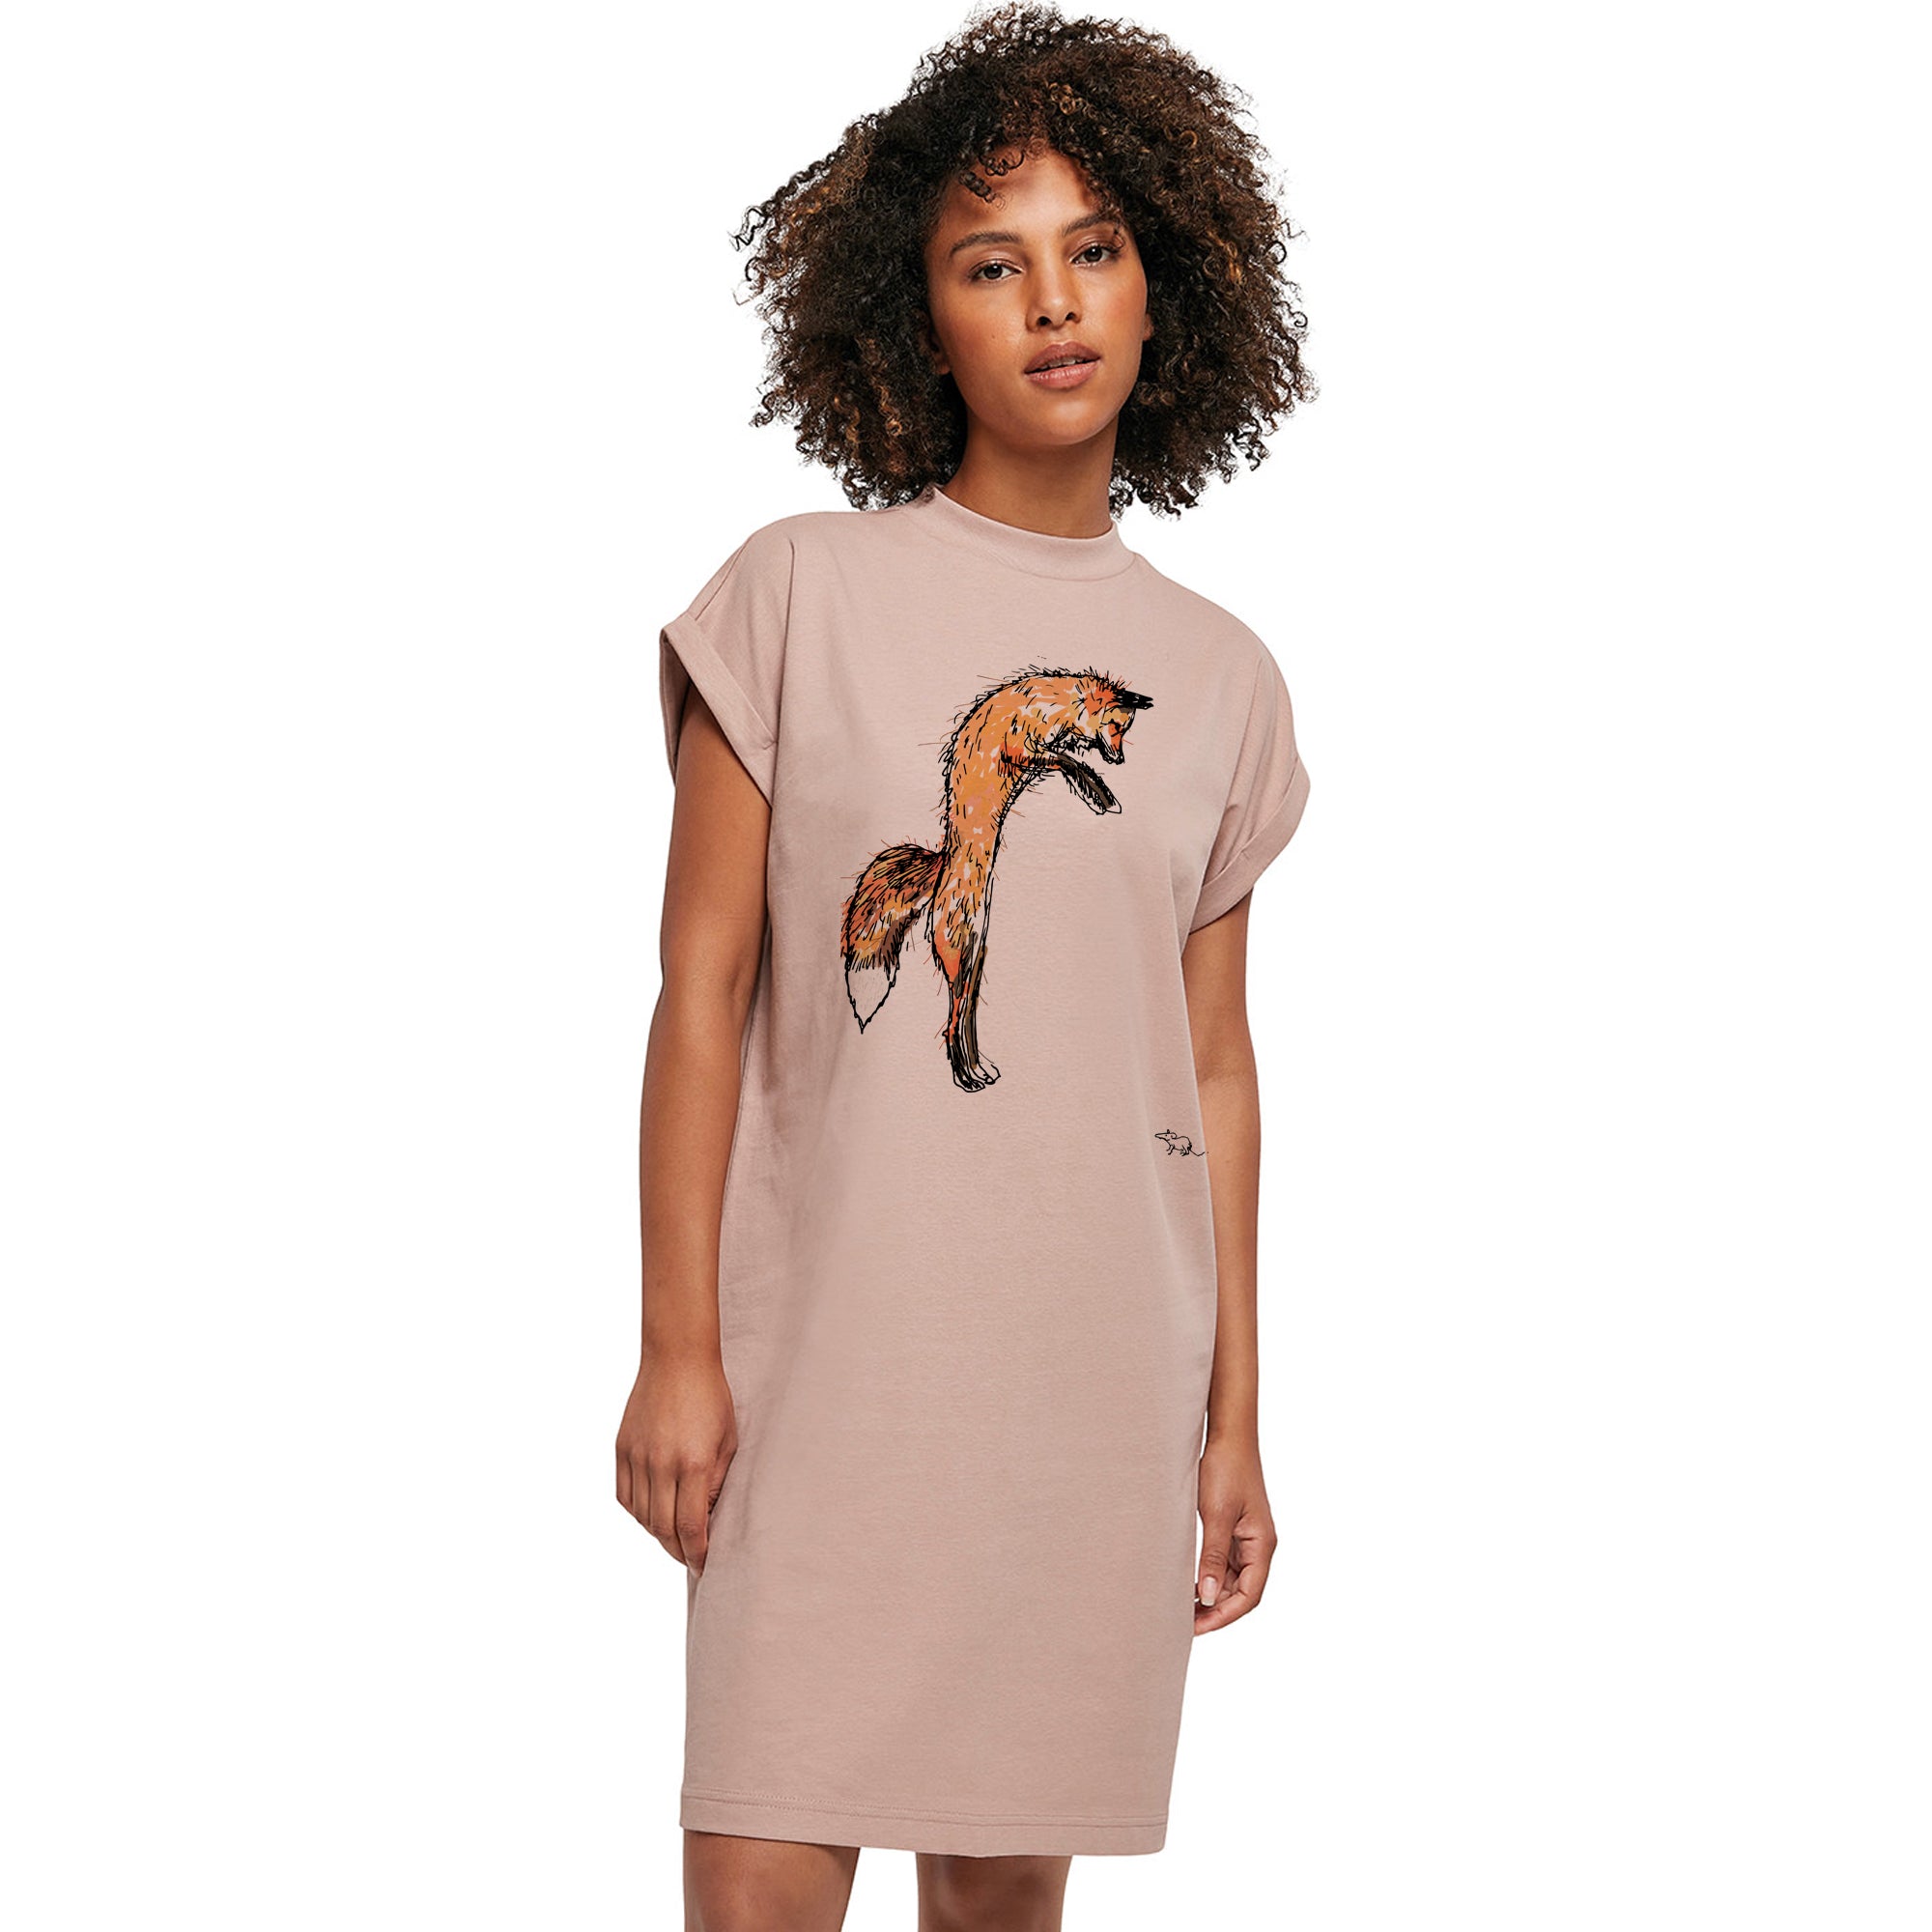 Oversized dress, Fox and mouse